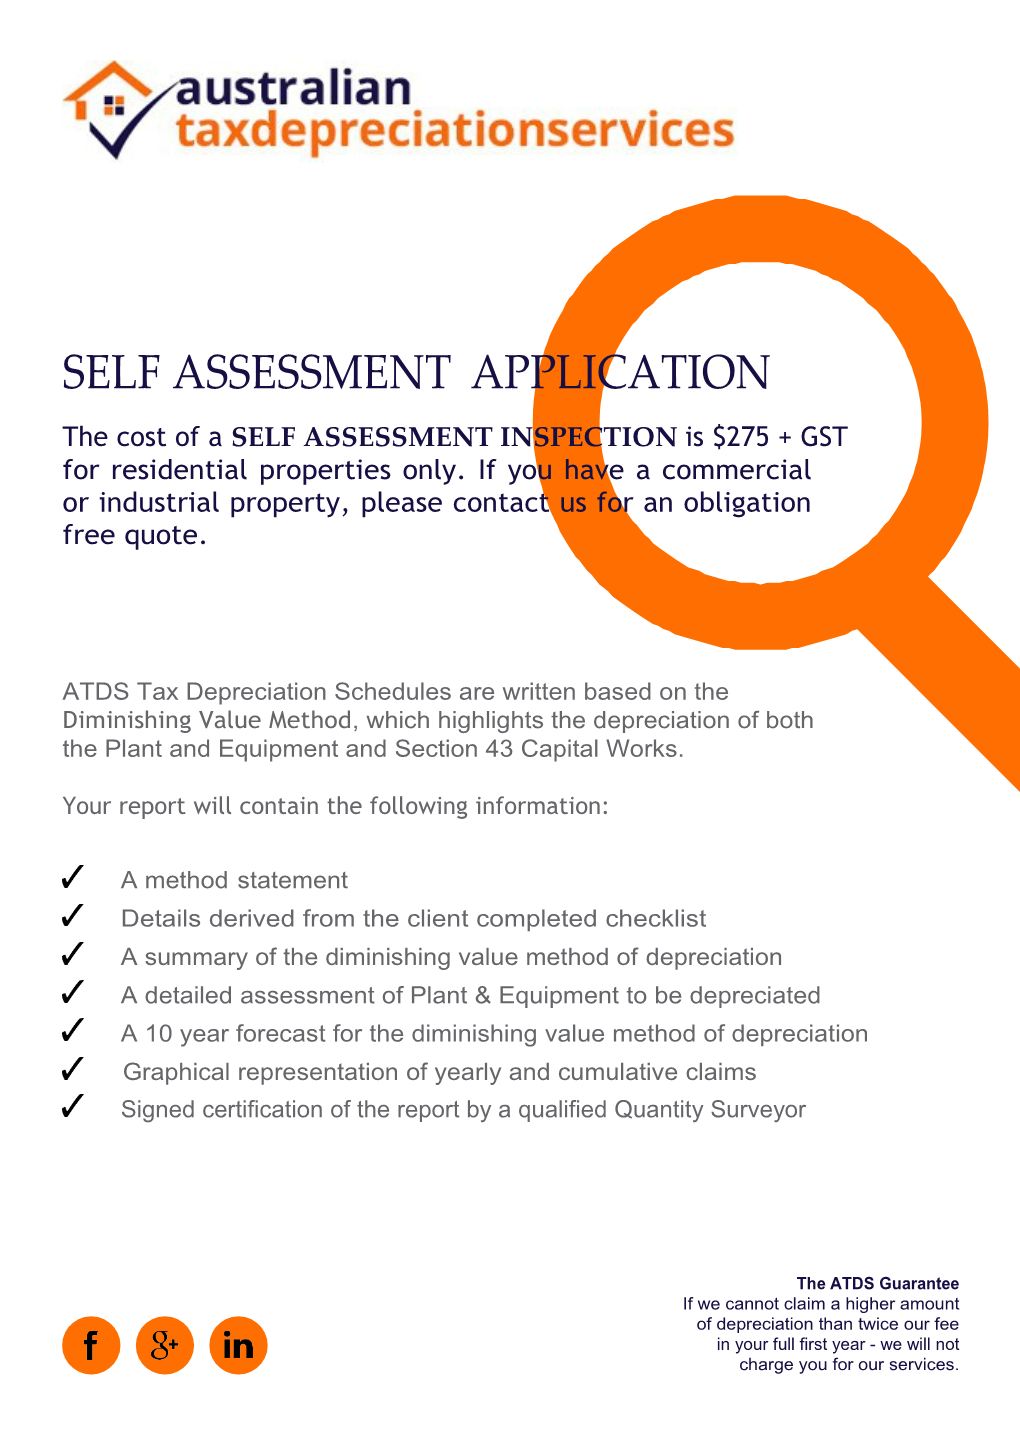 The Cost of a SELF ASSESSMENT INSPECTION Is $275 + GST